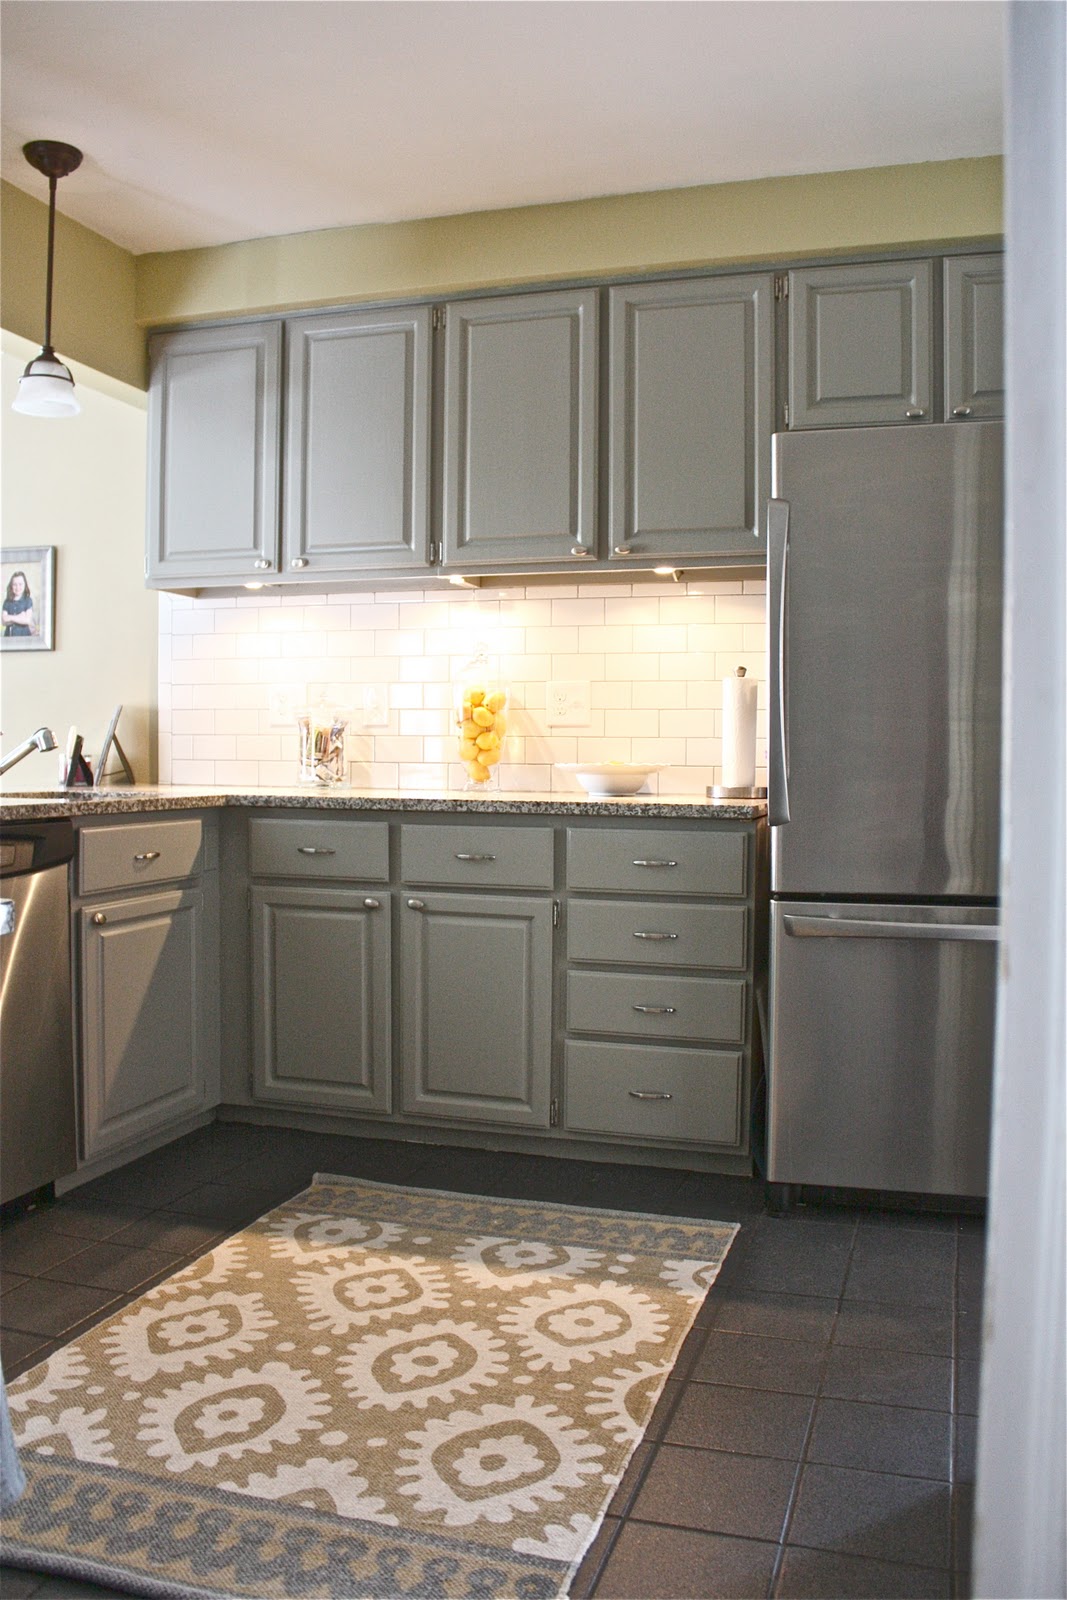 Gray Kitchen Cabinet: the Thing that You Should Have ...